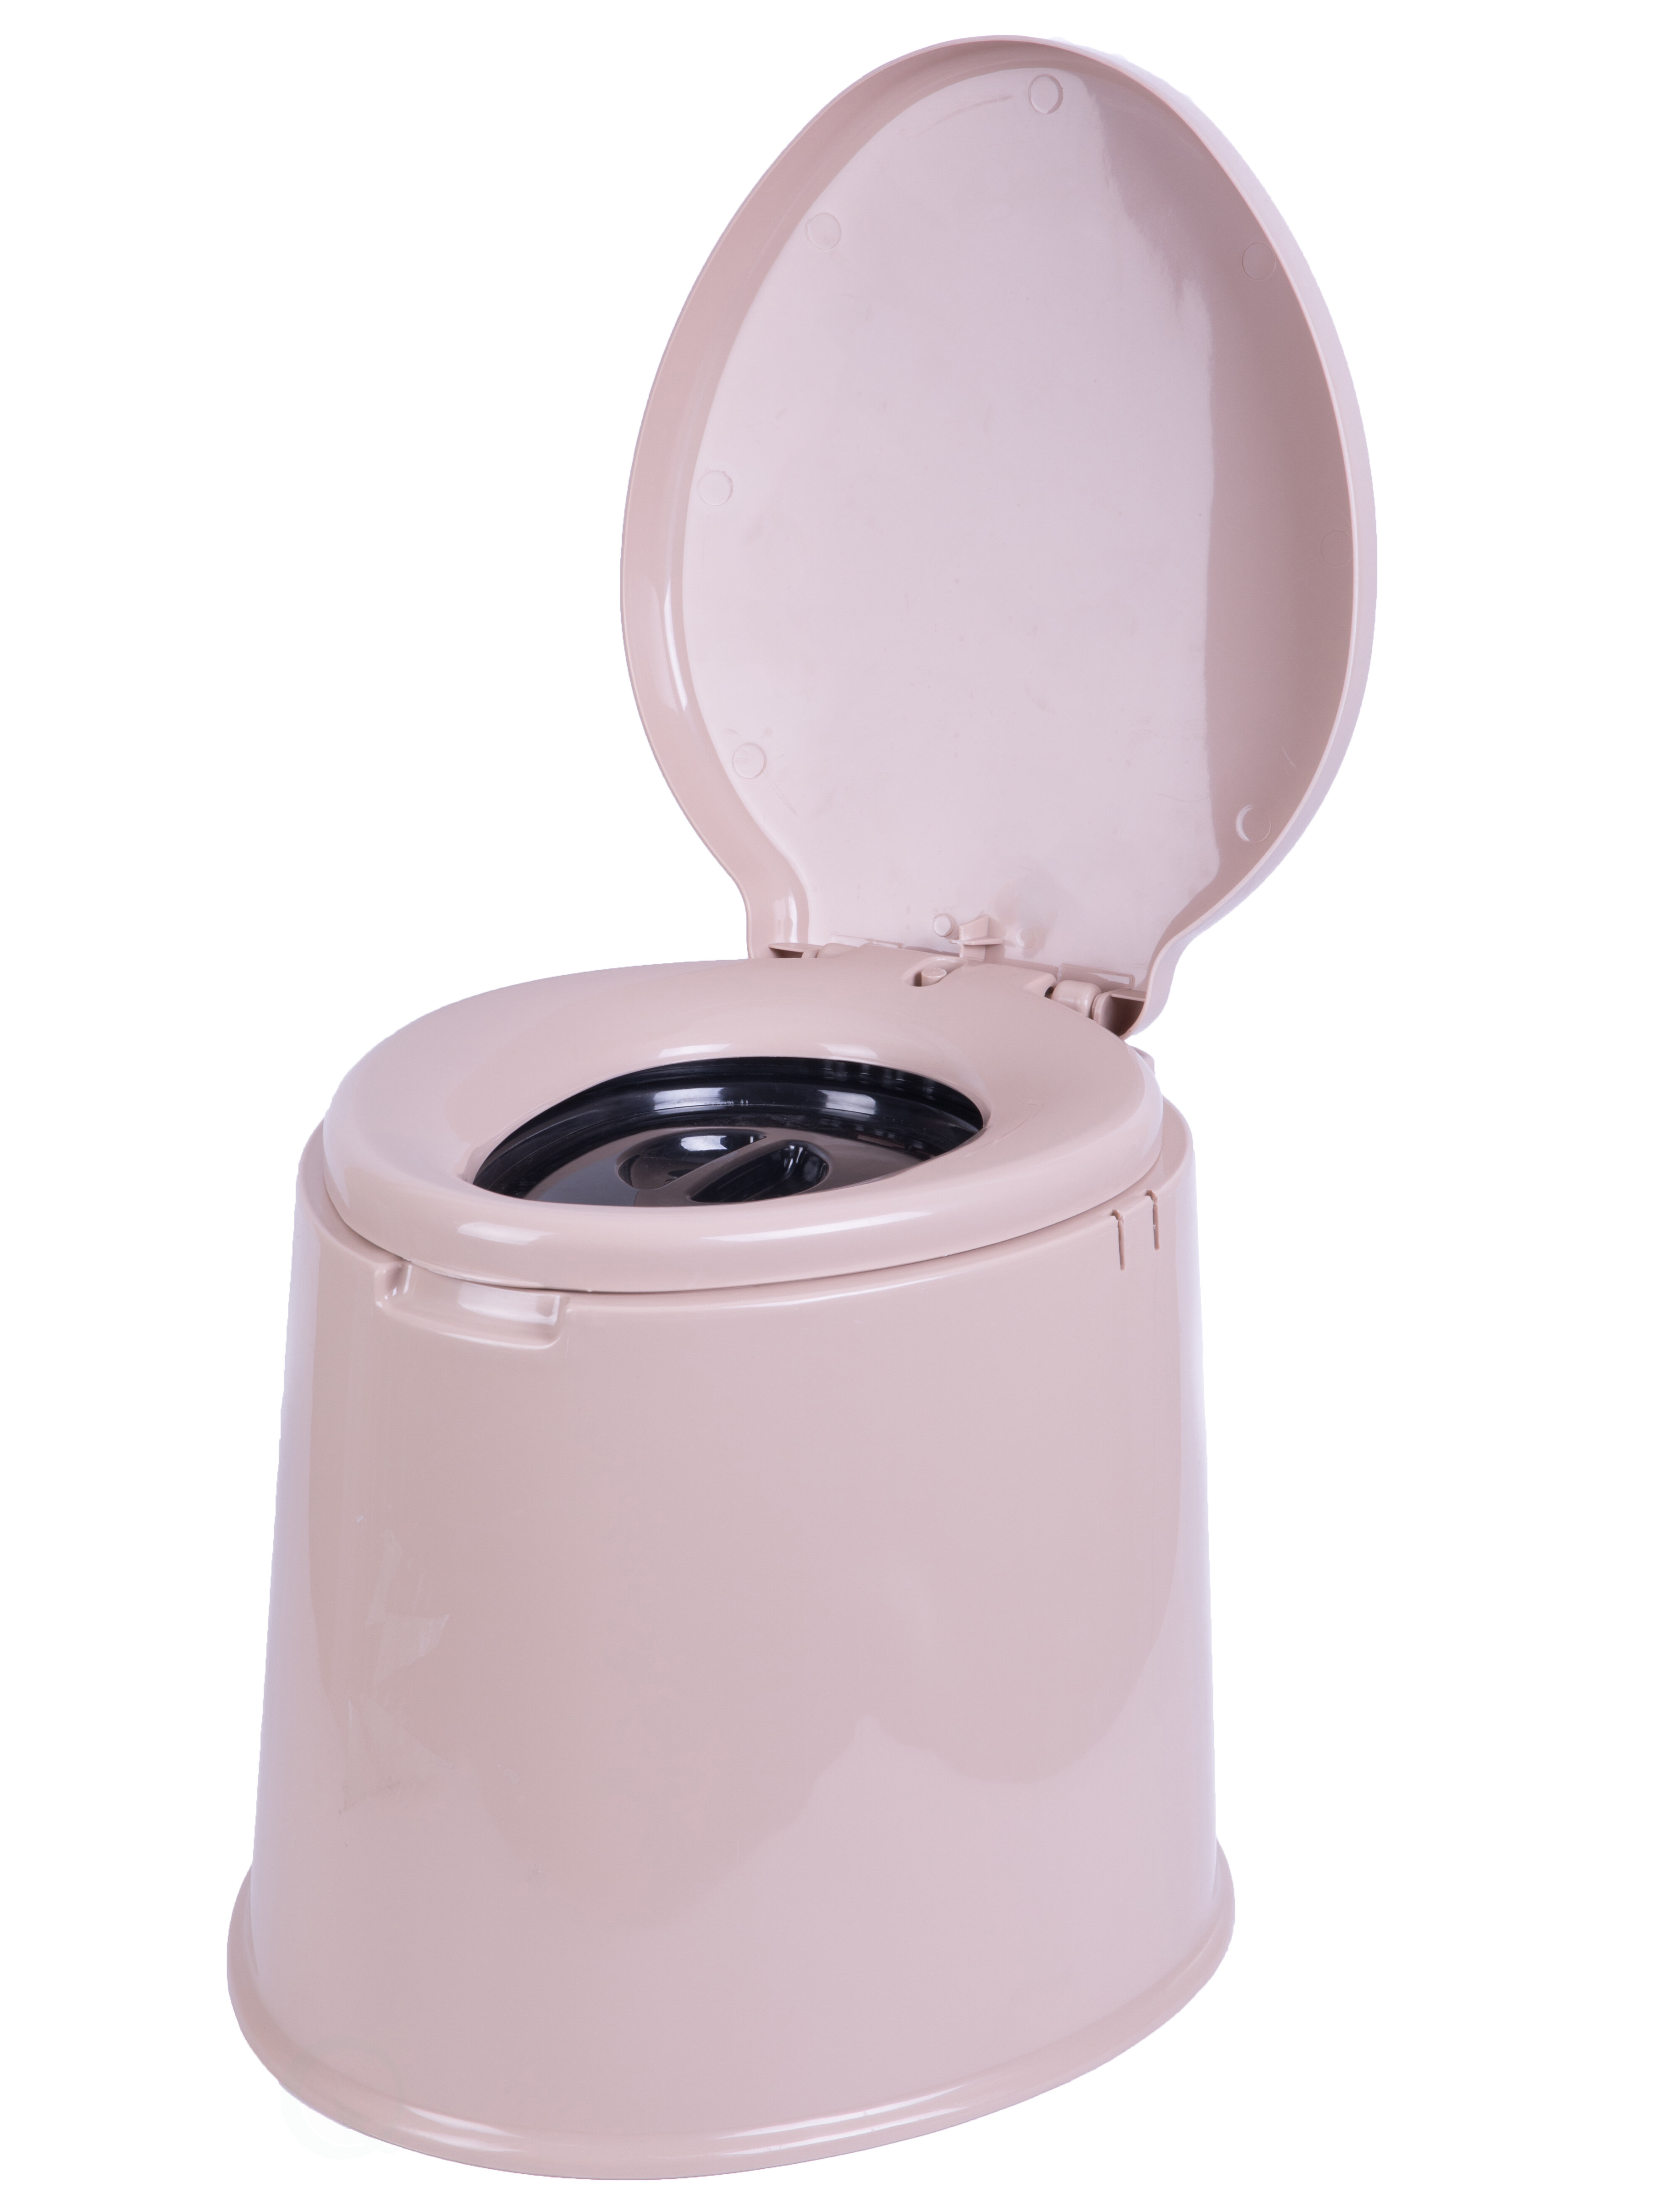 Details about   Portable Seat Toilet 5L Outdoor Camping Hygiene Toilet Potty Travel Car SUV New 